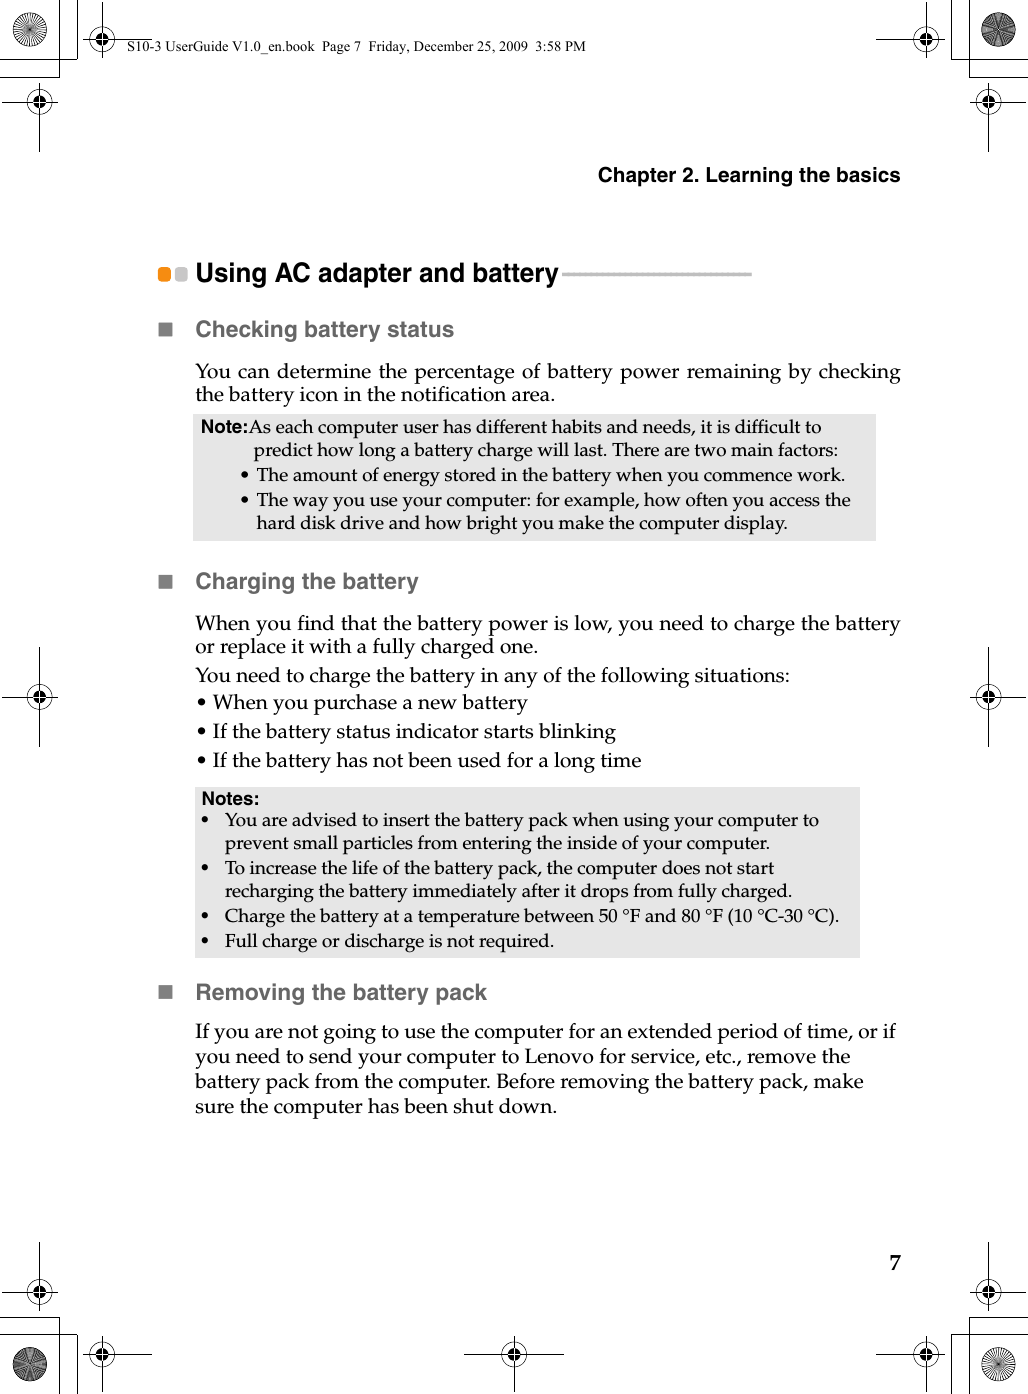 Chapter 2. Learning the basics7Using AC adapter and battery - - - - - - - - - - - - - - - - - - - - - - - - - - - - - - - - -Checking battery statusYou can determine the percentage of battery power remaining by checkingthe battery icon in the notification area.Charging the batteryWhen you find that the battery power is low, you need to charge the batteryor replace it with a fully charged one.You need to charge the battery in any of the following situations:• When you purchase a new battery• If the battery status indicator starts blinking• If the battery has not been used for a long timeRemoving the battery pack If you are not going to use the computer for an extended period of time, or if you need to send your computer to Lenovo for service, etc., remove the battery pack from the computer. Before removing the battery pack, make sure the computer has been shut down.Note:As each computer user has different habits and needs, it is difficult to predict how long a battery charge will last. There are two main factors:• The amount of energy stored in the battery when you commence work.• The way you use your computer: for example, how often you access the hard disk drive and how bright you make the computer display.Notes:•You are advised to insert the battery pack when using your computer to prevent small particles from entering the inside of your computer.•To increase the life of the battery pack, the computer does not start recharging the battery immediately after it drops from fully charged.•Charge the battery at a temperature between 50 °F and 80 °F (10 °C-30 °C).•Full charge or discharge is not required.S10-3 UserGuide V1.0_en.book  Page 7  Friday, December 25, 2009  3:58 PM